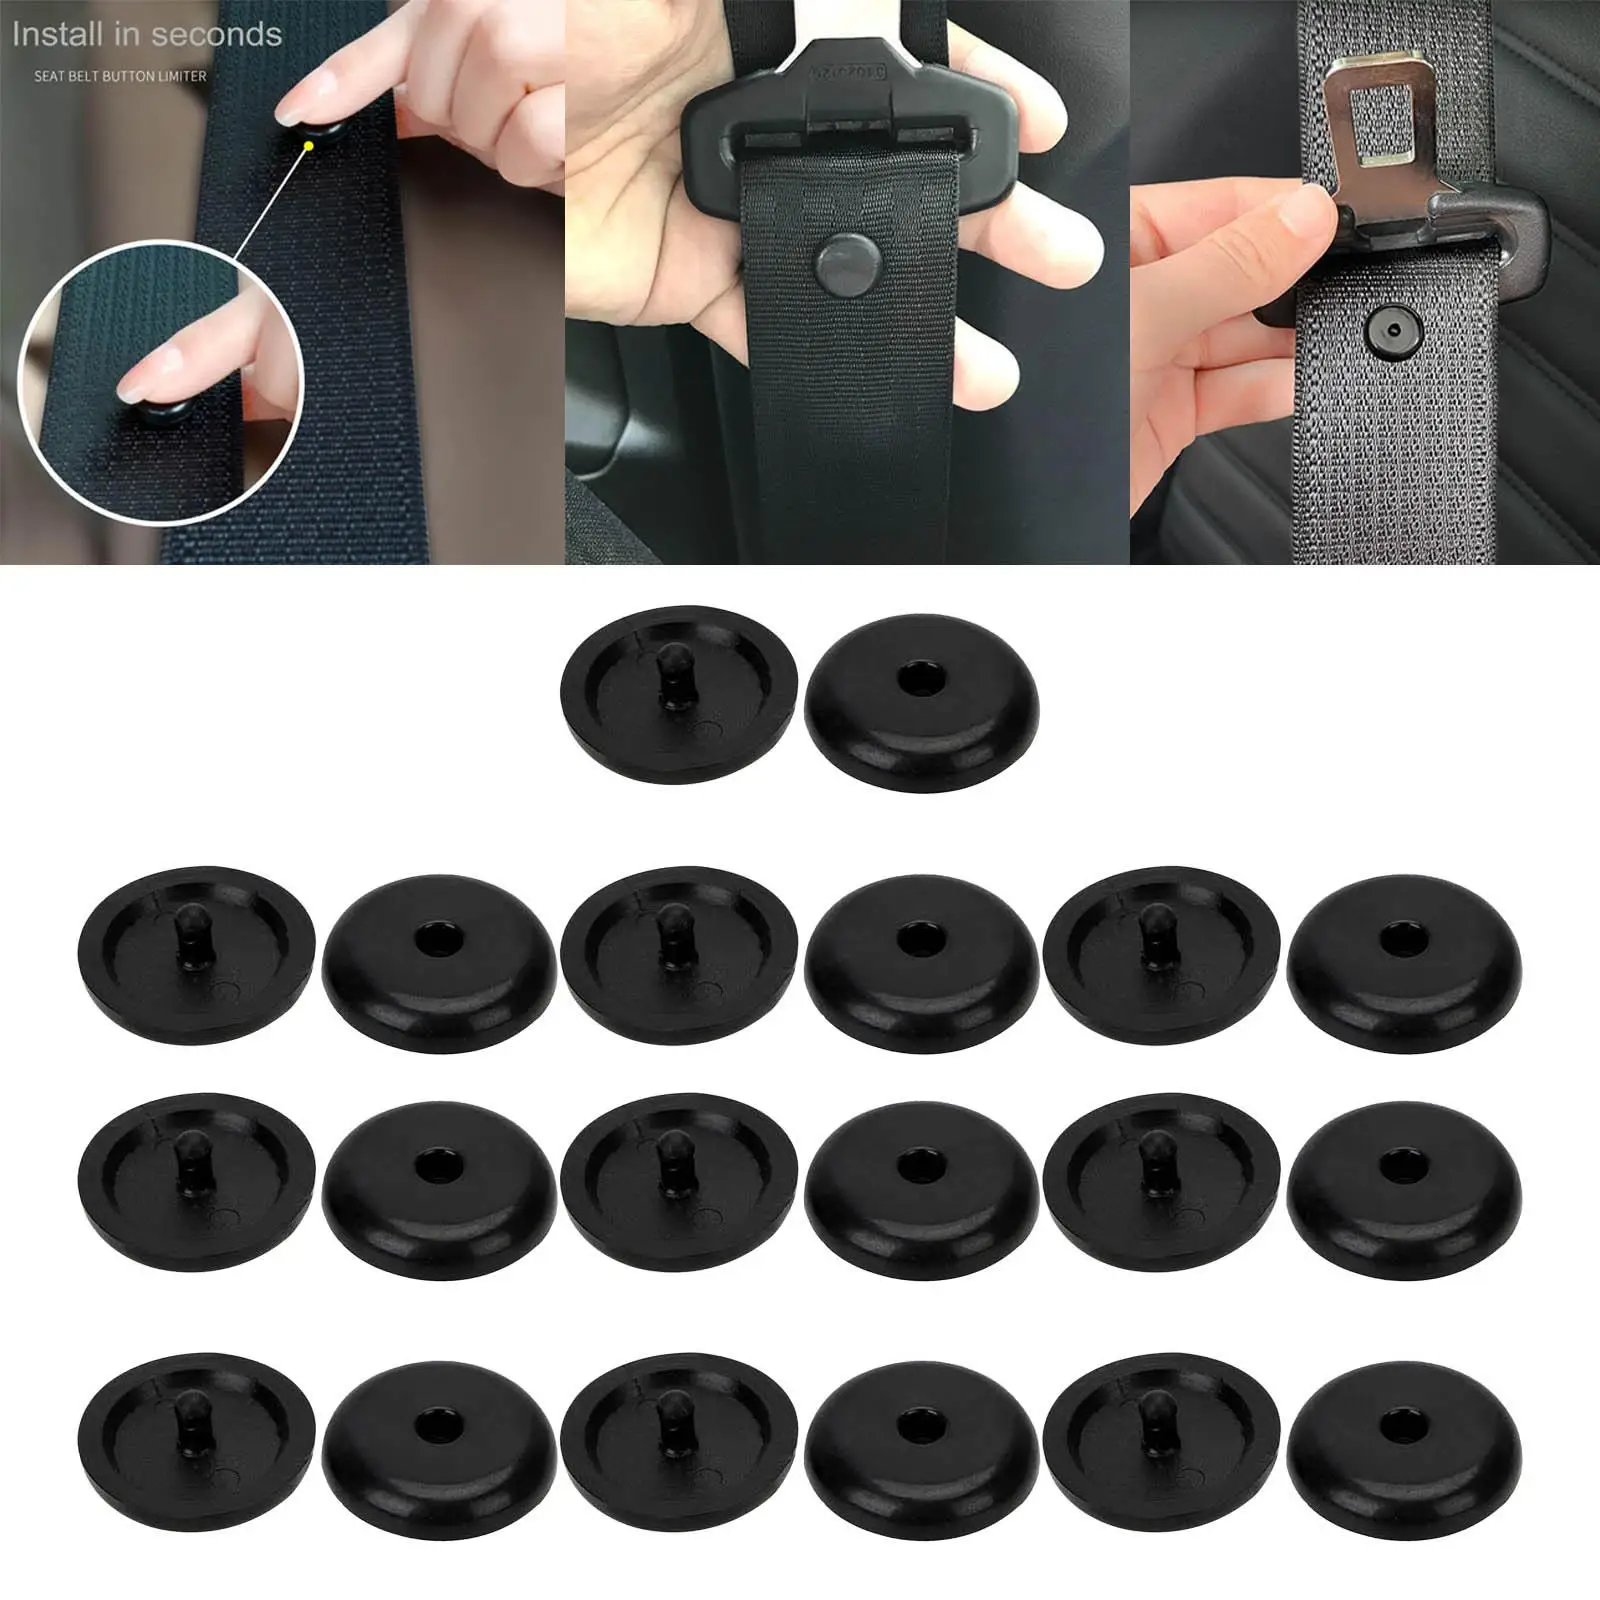 10 Pairs Seat Belt Stop Buttons Plastic Snaps On System Universal Fit Seat Belt Stopper Clips